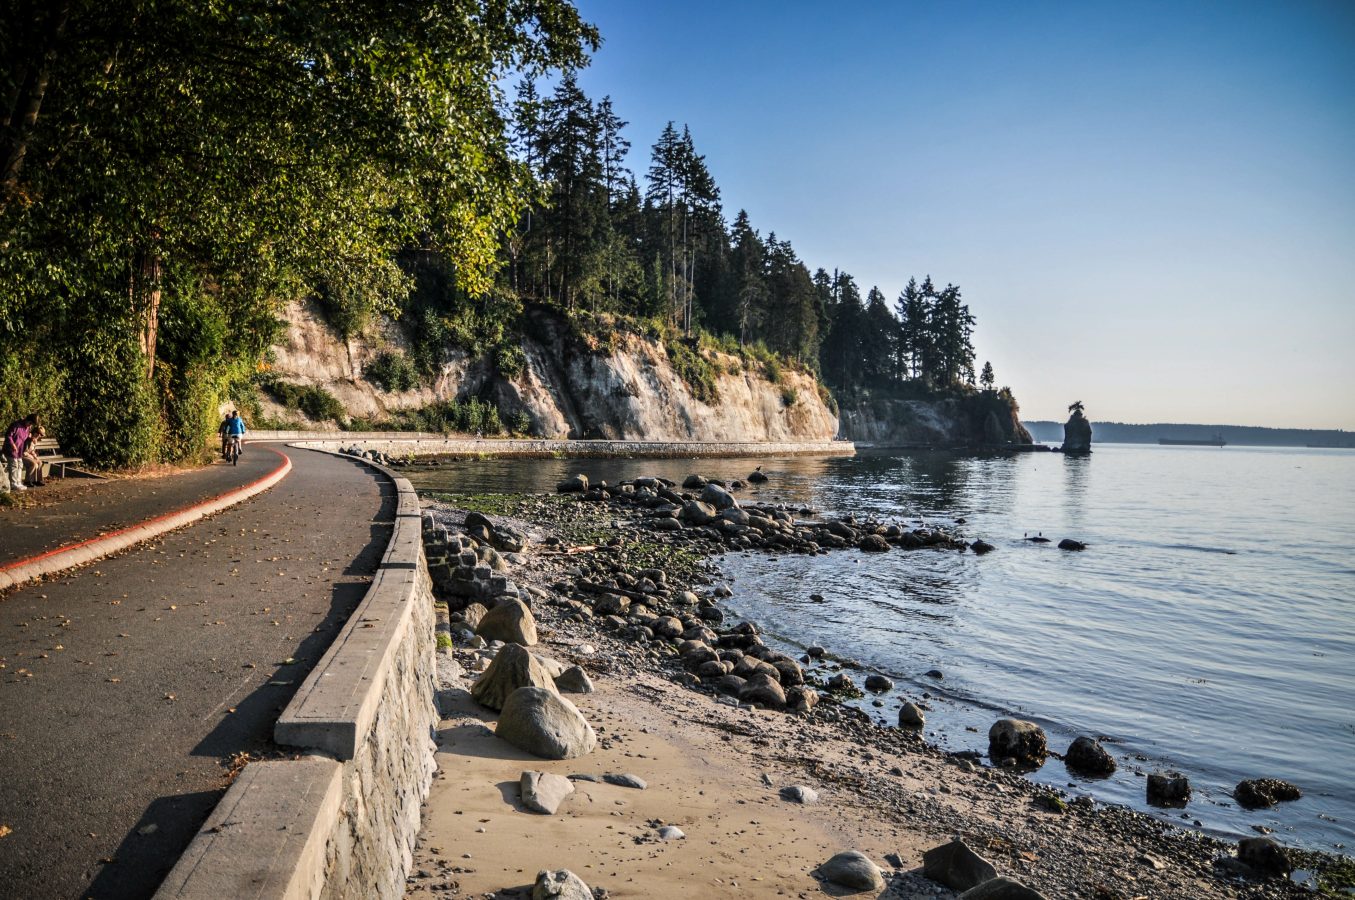 The seawall path in Stanley park in Vancouver, Canada.